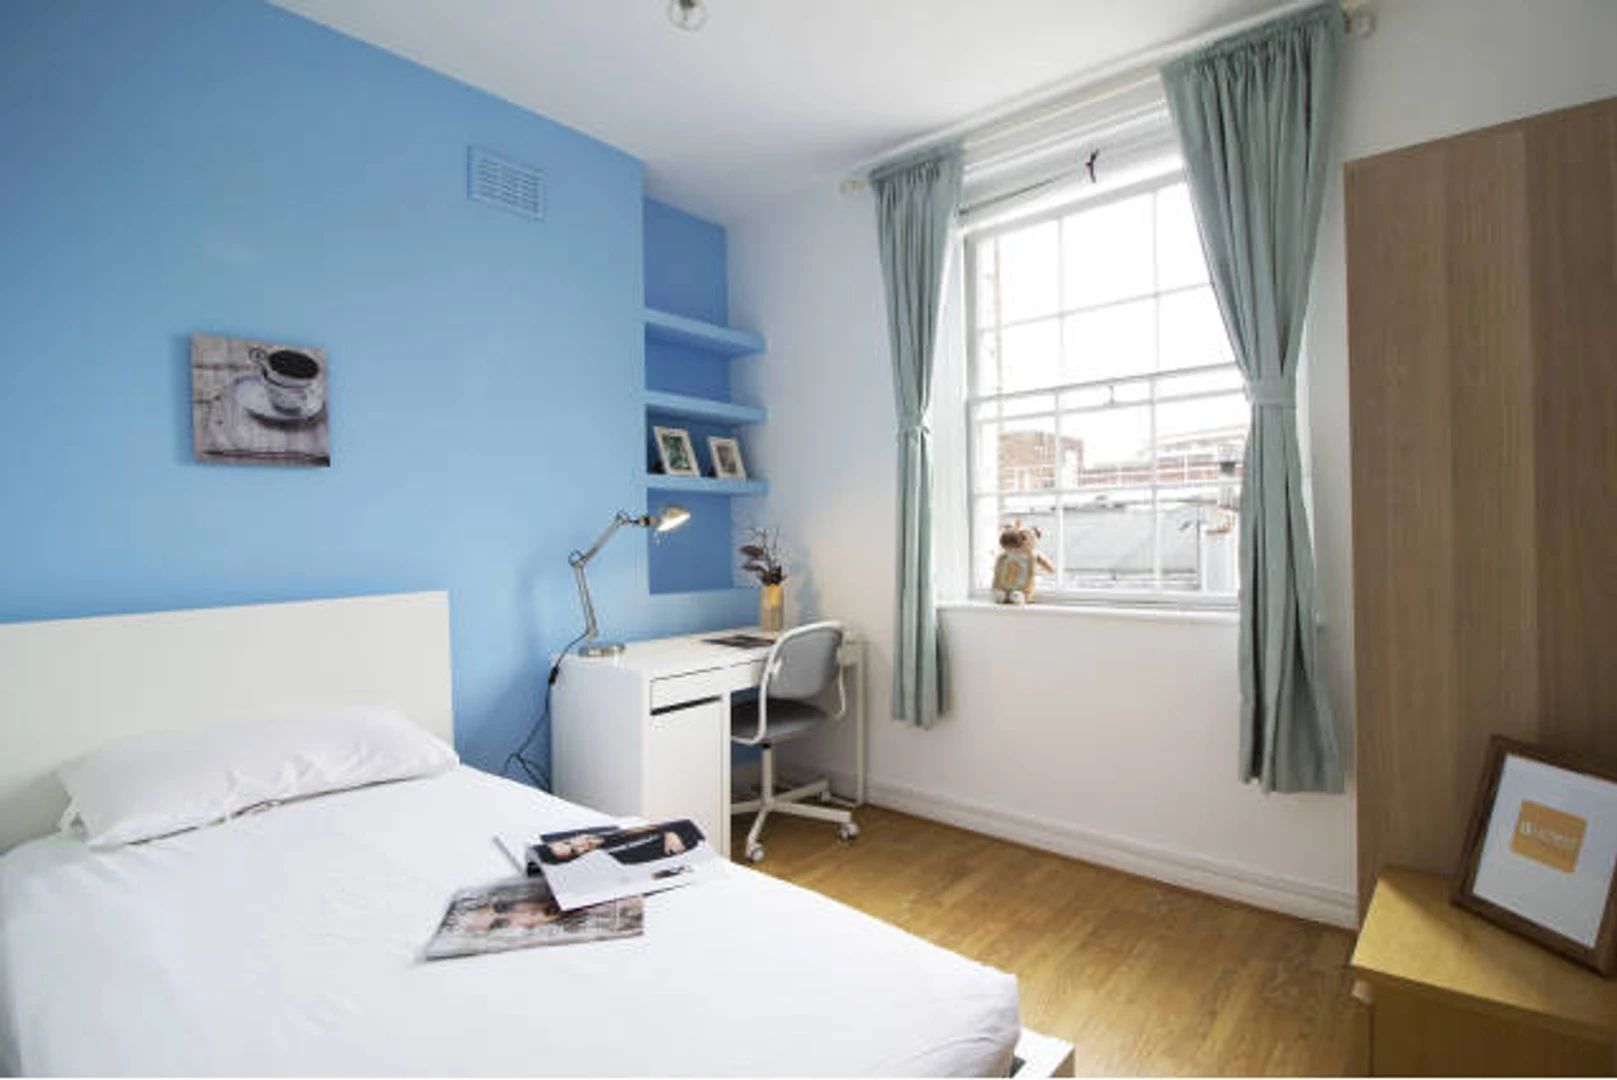 Accommodation with 3 bedrooms in city-of-westminster